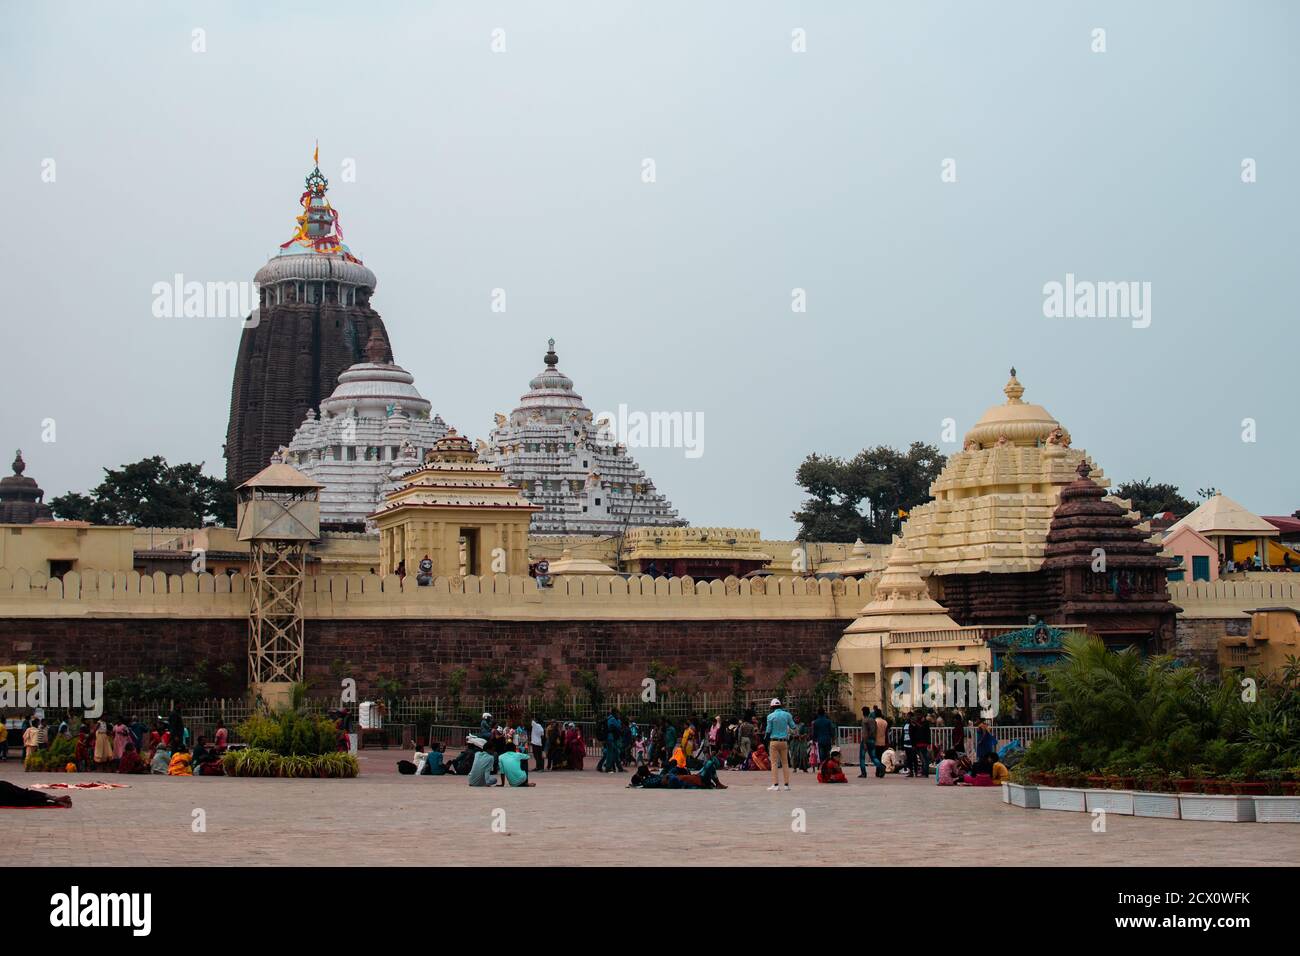 Puri, India - February 3, 2020: View over Jagannath temple when unidentified visits the religious destination on February 3, 2020 in Puri, India Stock Photo